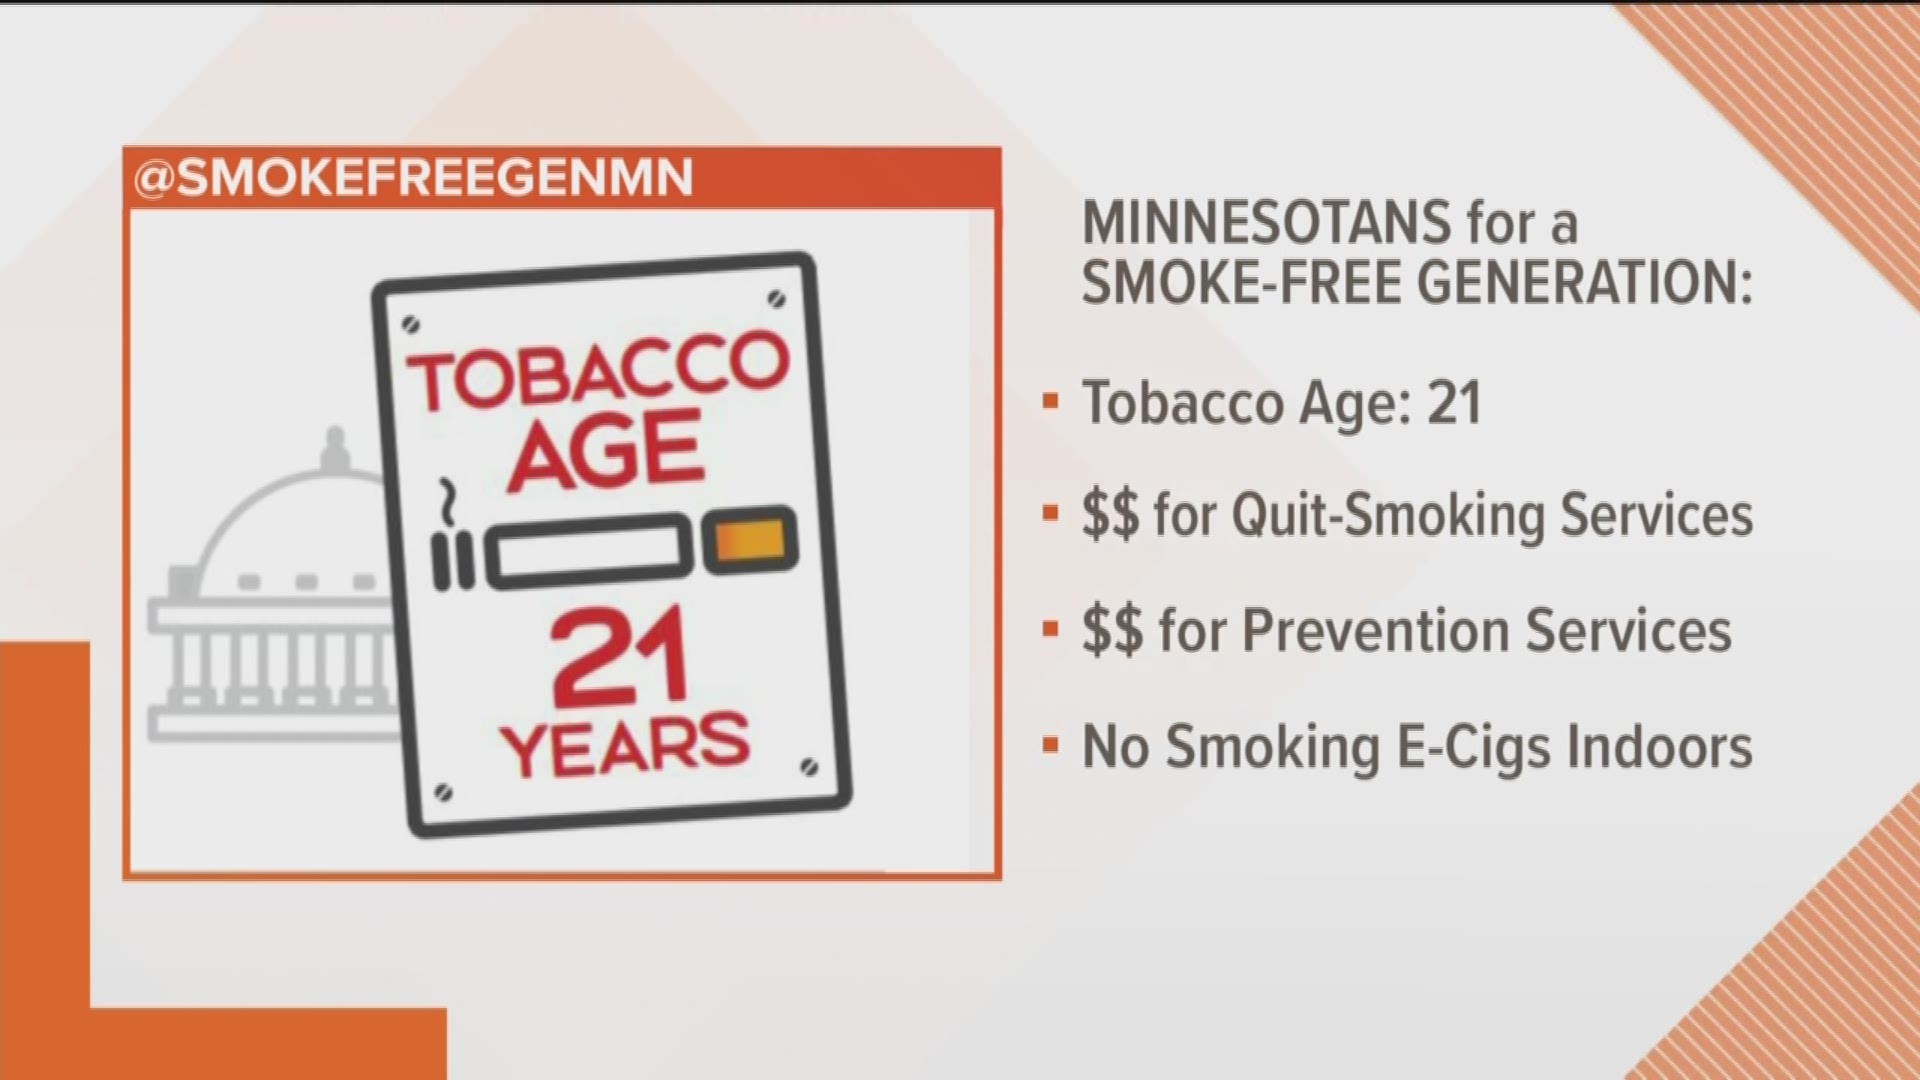 The Minnesota House is scheduled to vote on Wednesday on a bill that would make it illegal across the state to sell tobacco to anyone under the age of 21, among other things. https://kare11.tv/2IFb2cF